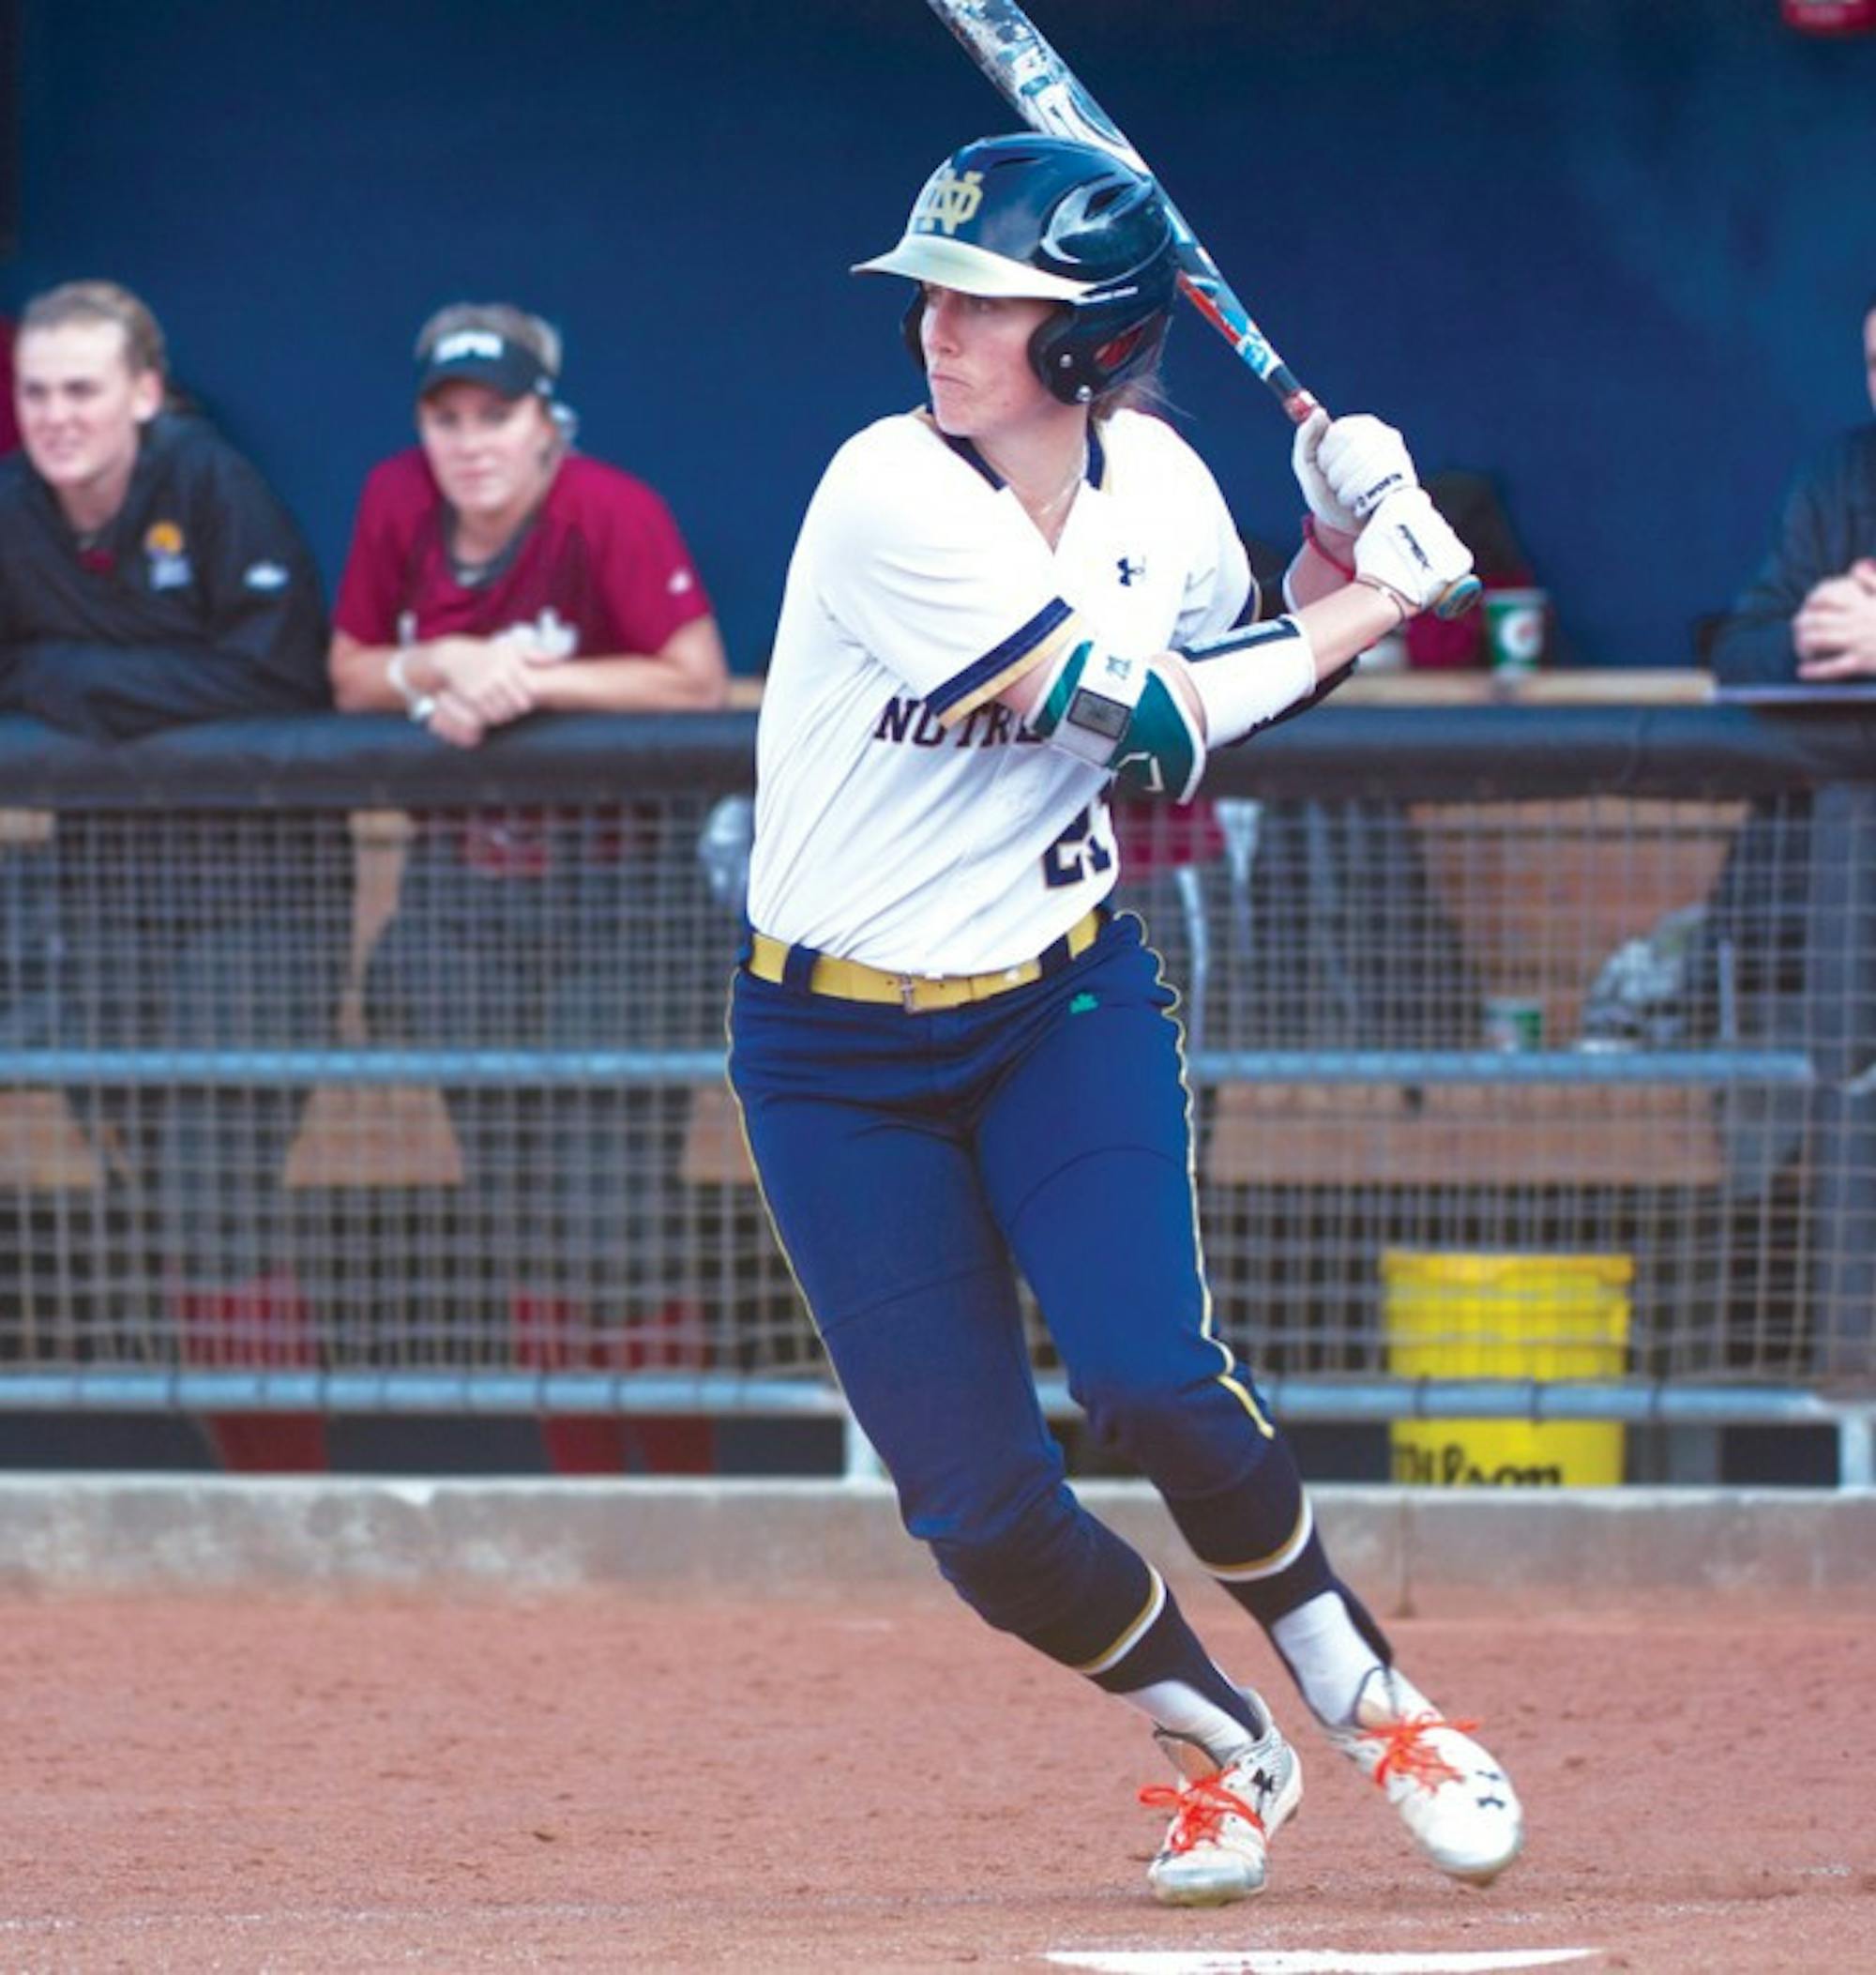 Irish senior center fielder Karley Wester waits for a pitch during Notre Dame’s 13-4 win over IUPUI on April 12.